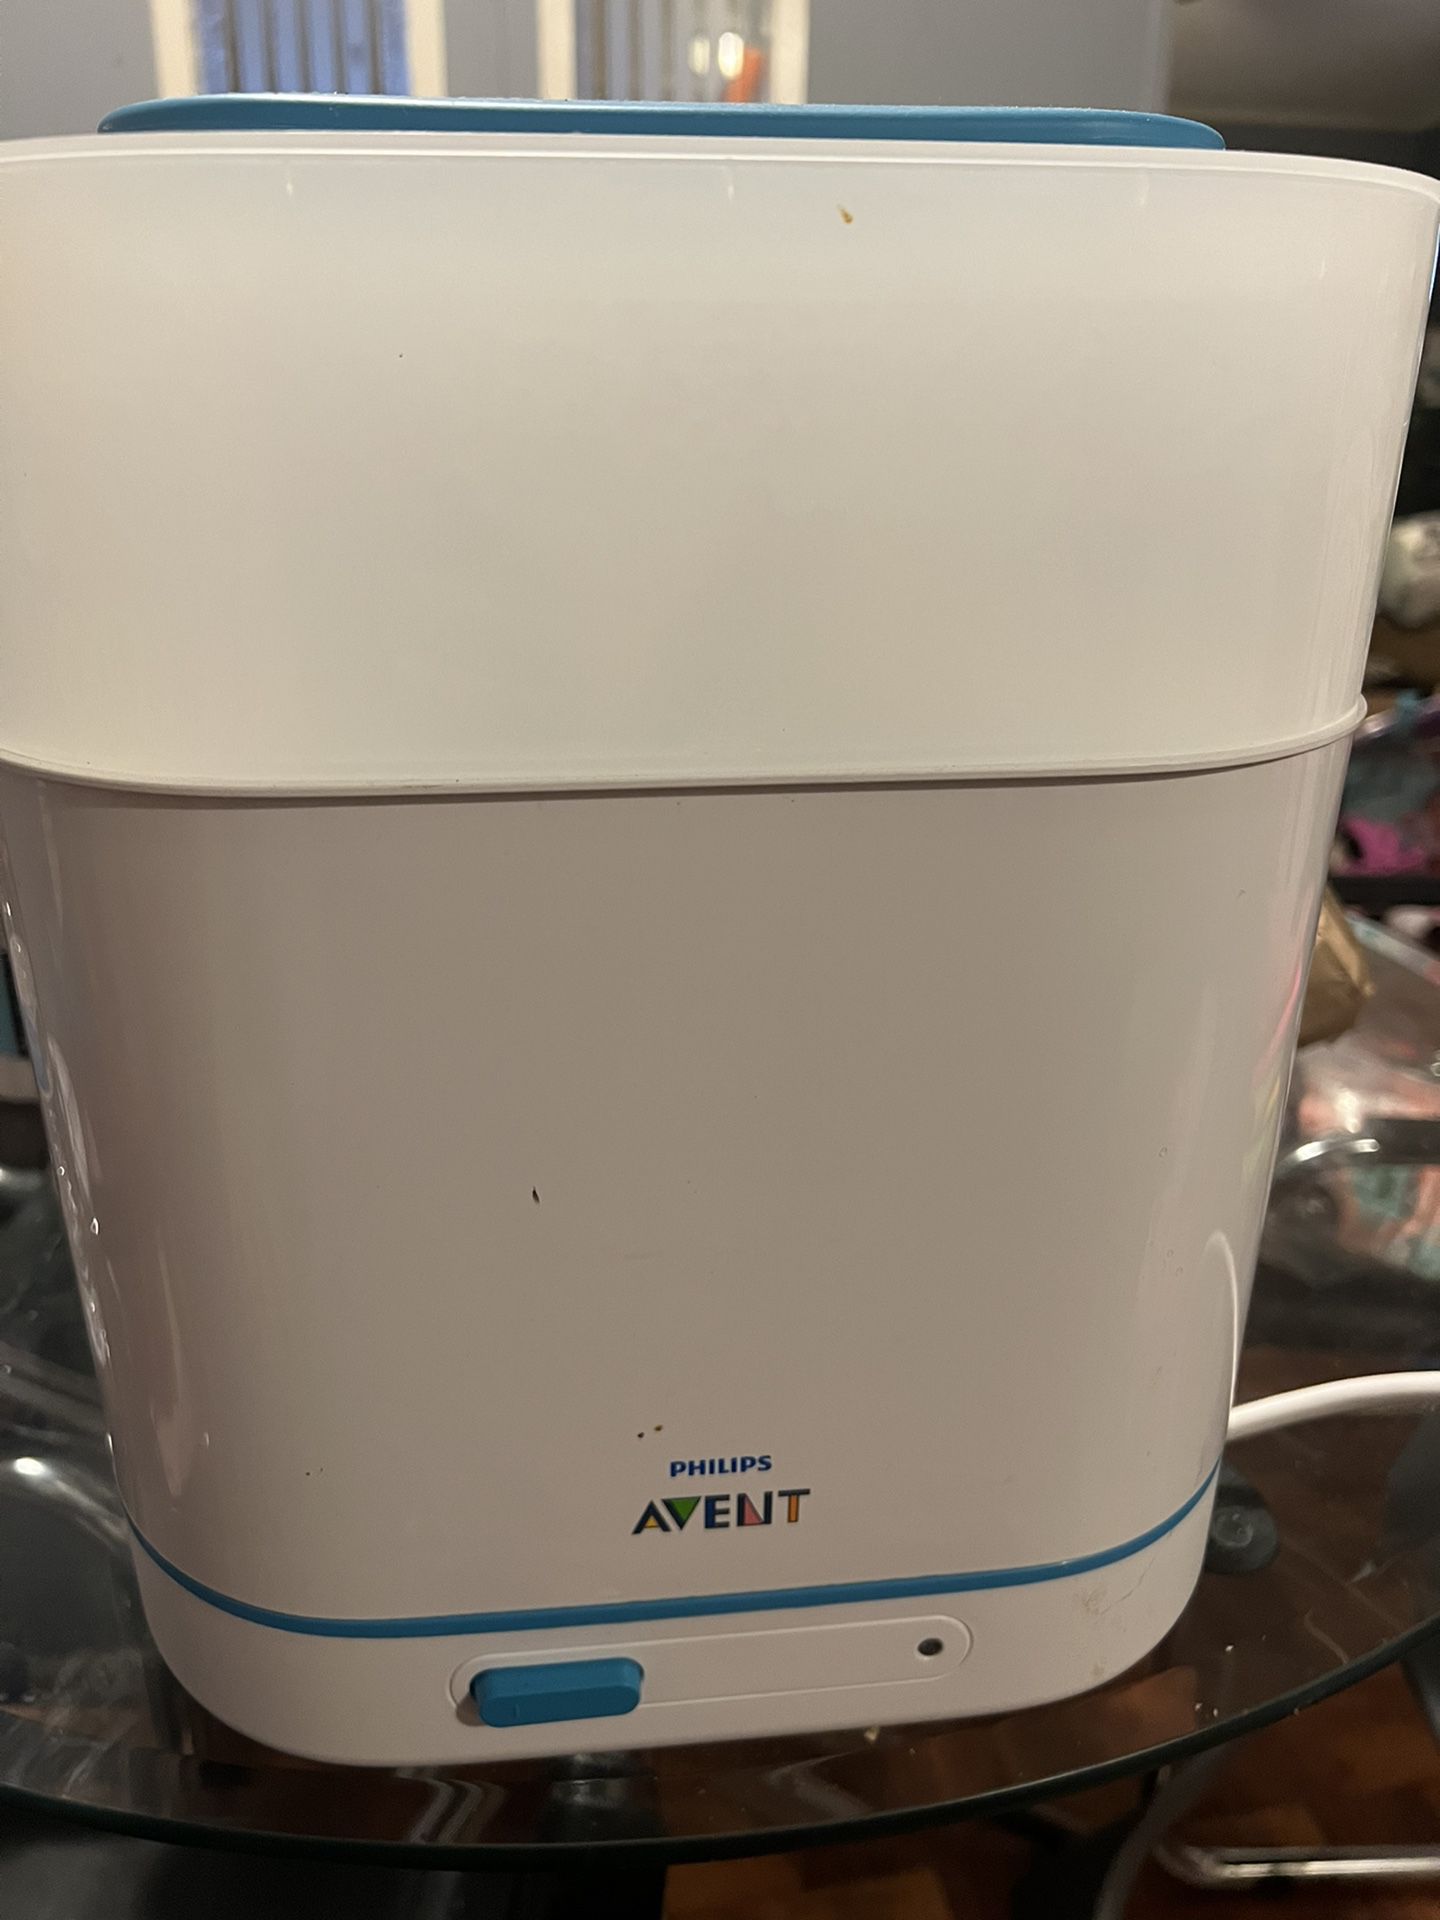 Philips Avent 3-In-1 Electric Steam Sterilizer For Baby Bottles